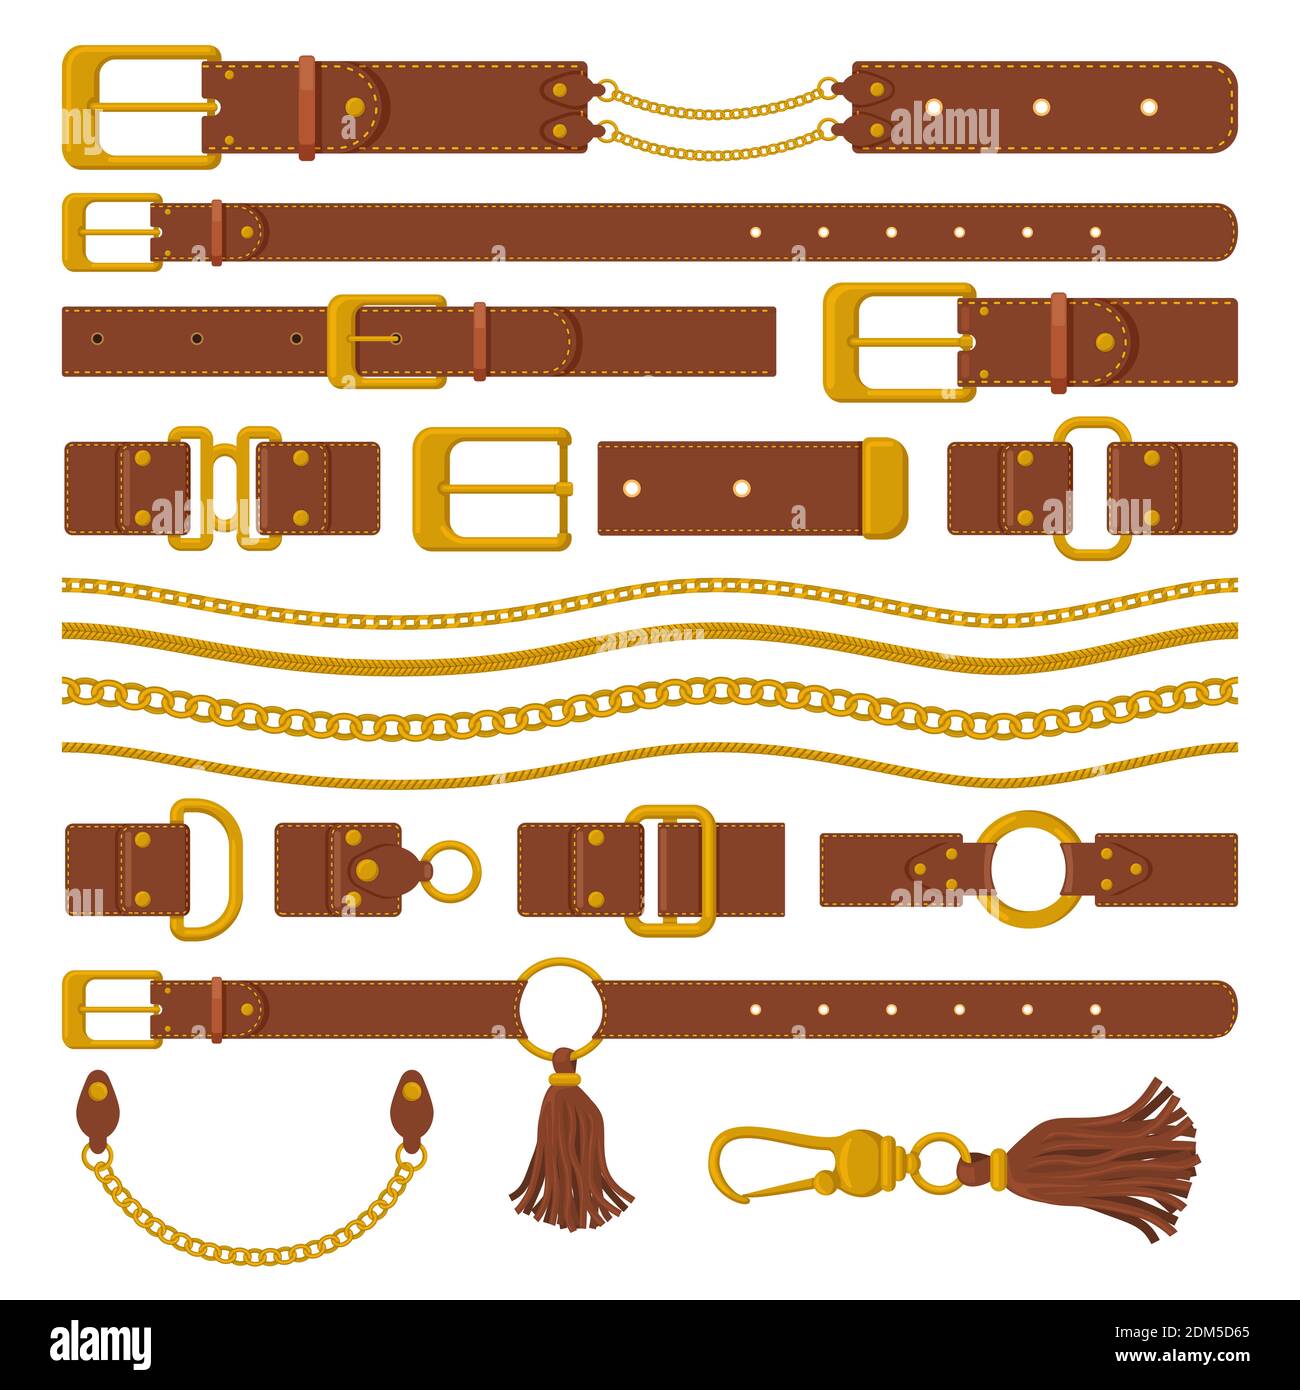 Belts and chains elements. Leather brown belts, gold ring straps, chains and metal buckles. Haberdashery leather accessories vector illustration Stock Vector